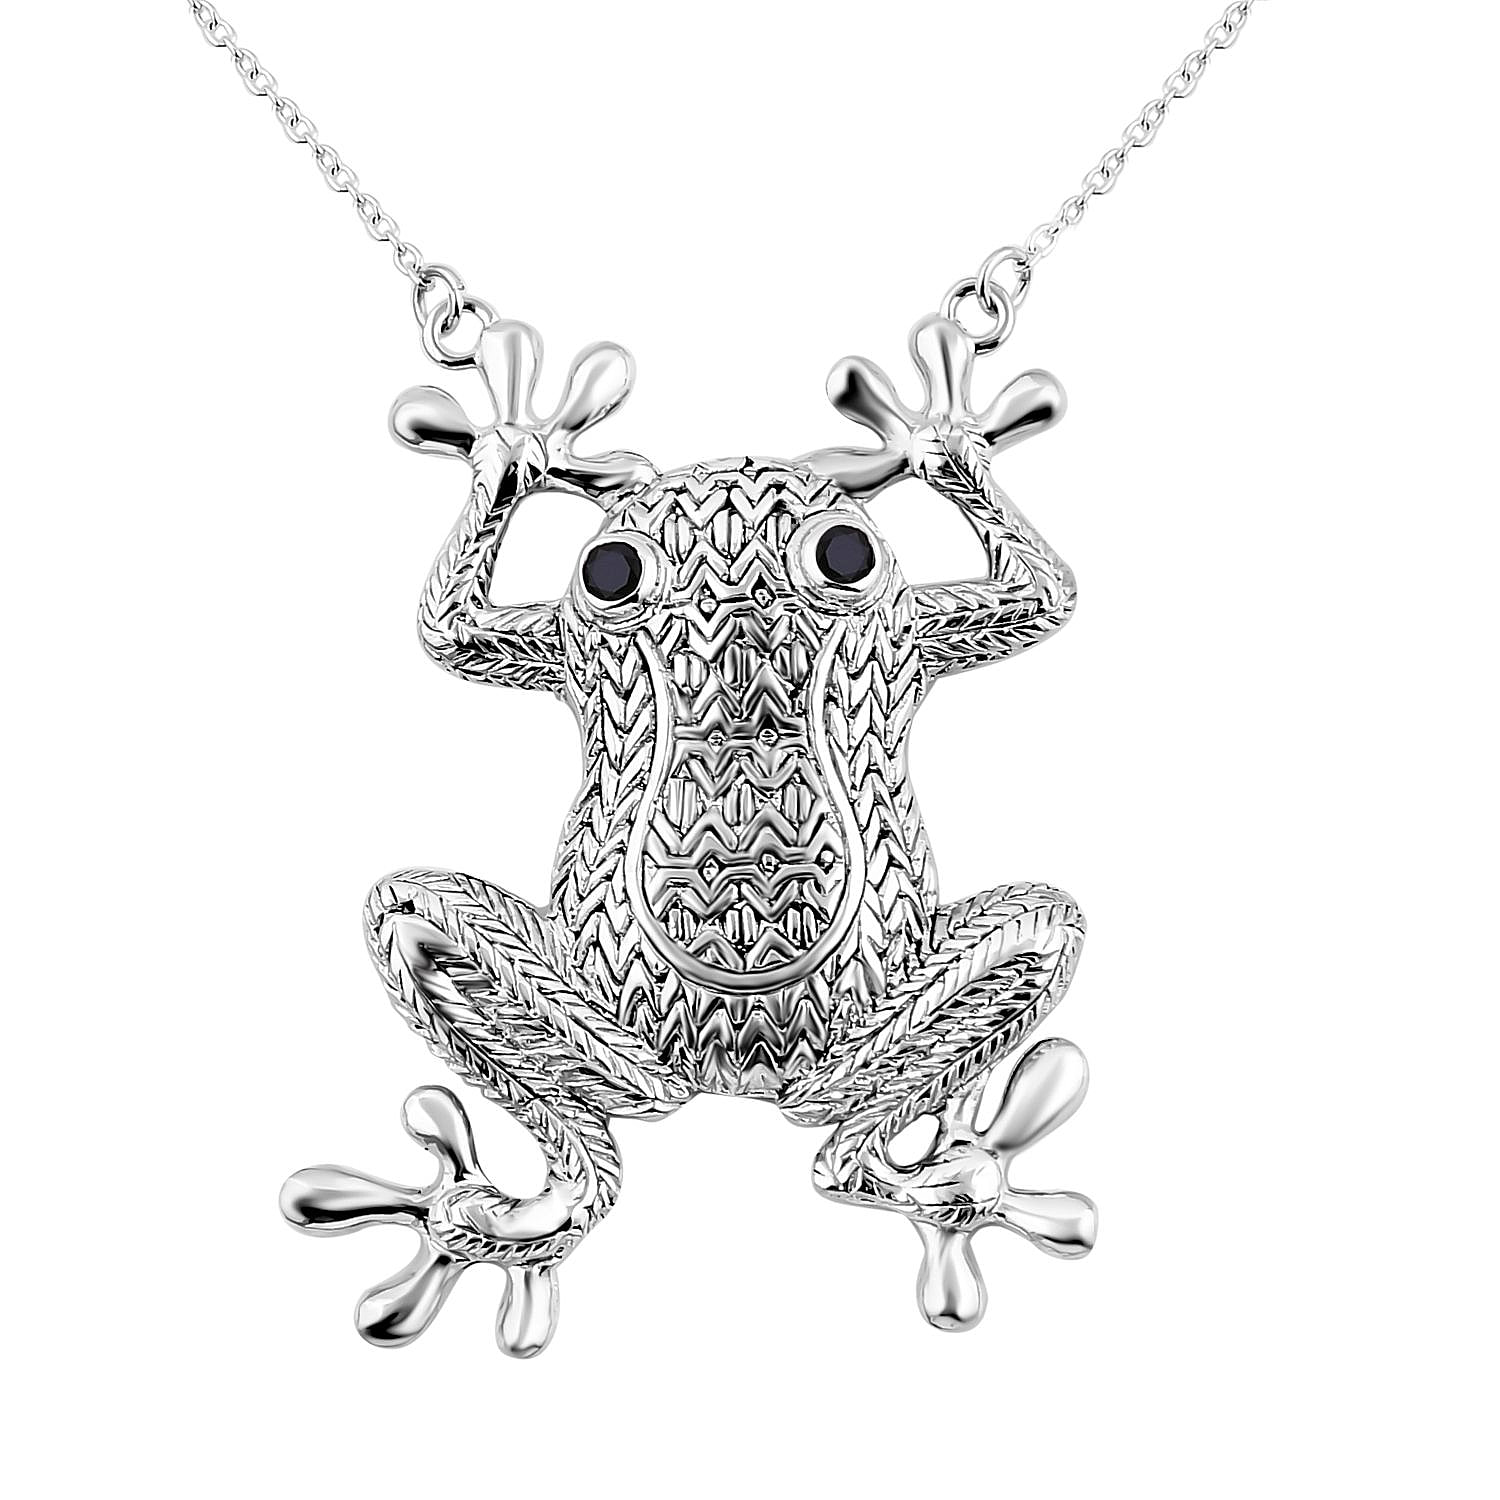 GP Italian Garden Collection - Boi Ploi Black Spinel Frog Necklace (Size - 20) in Sterling Silver